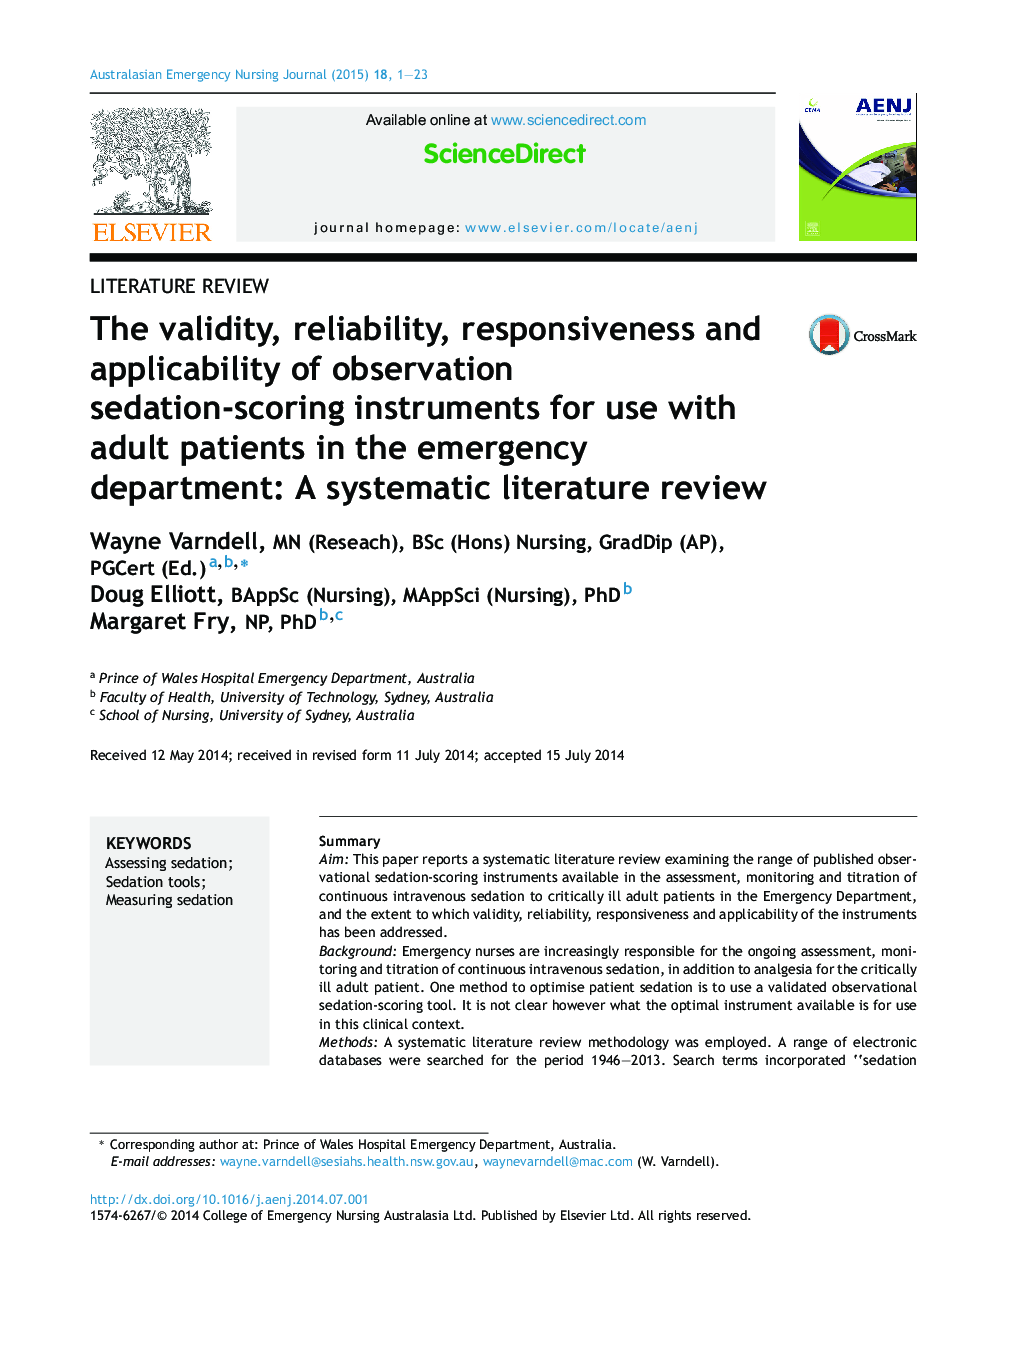 The validity, reliability, responsiveness and applicability of observation sedation-scoring instruments for use with adult patients in the emergency department: A systematic literature review